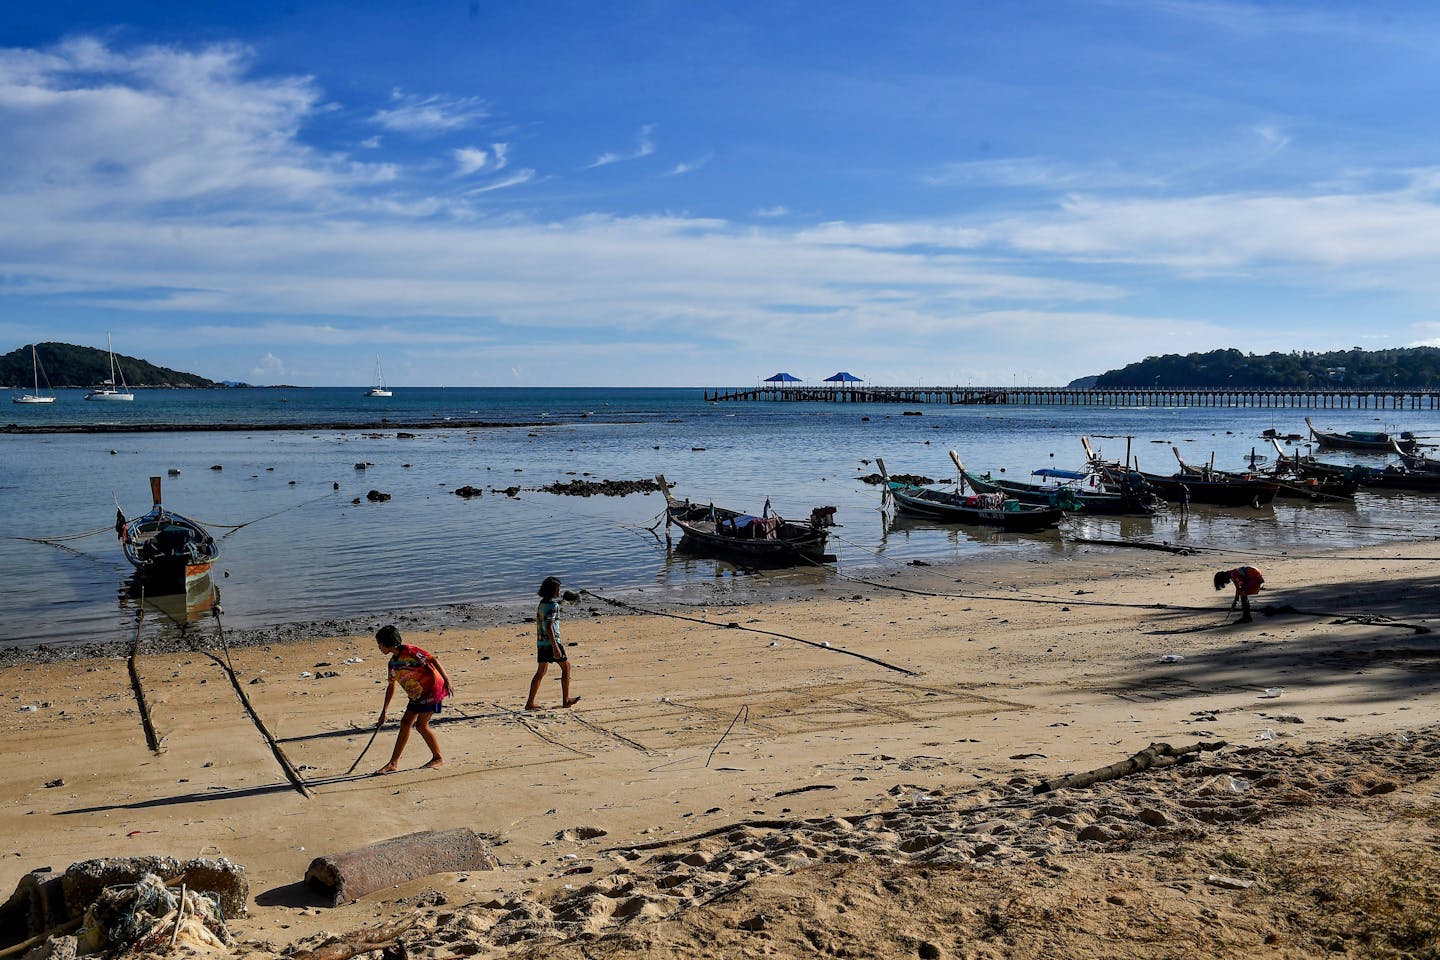 Moken children play on the beach, with small boats tied up in the shallows